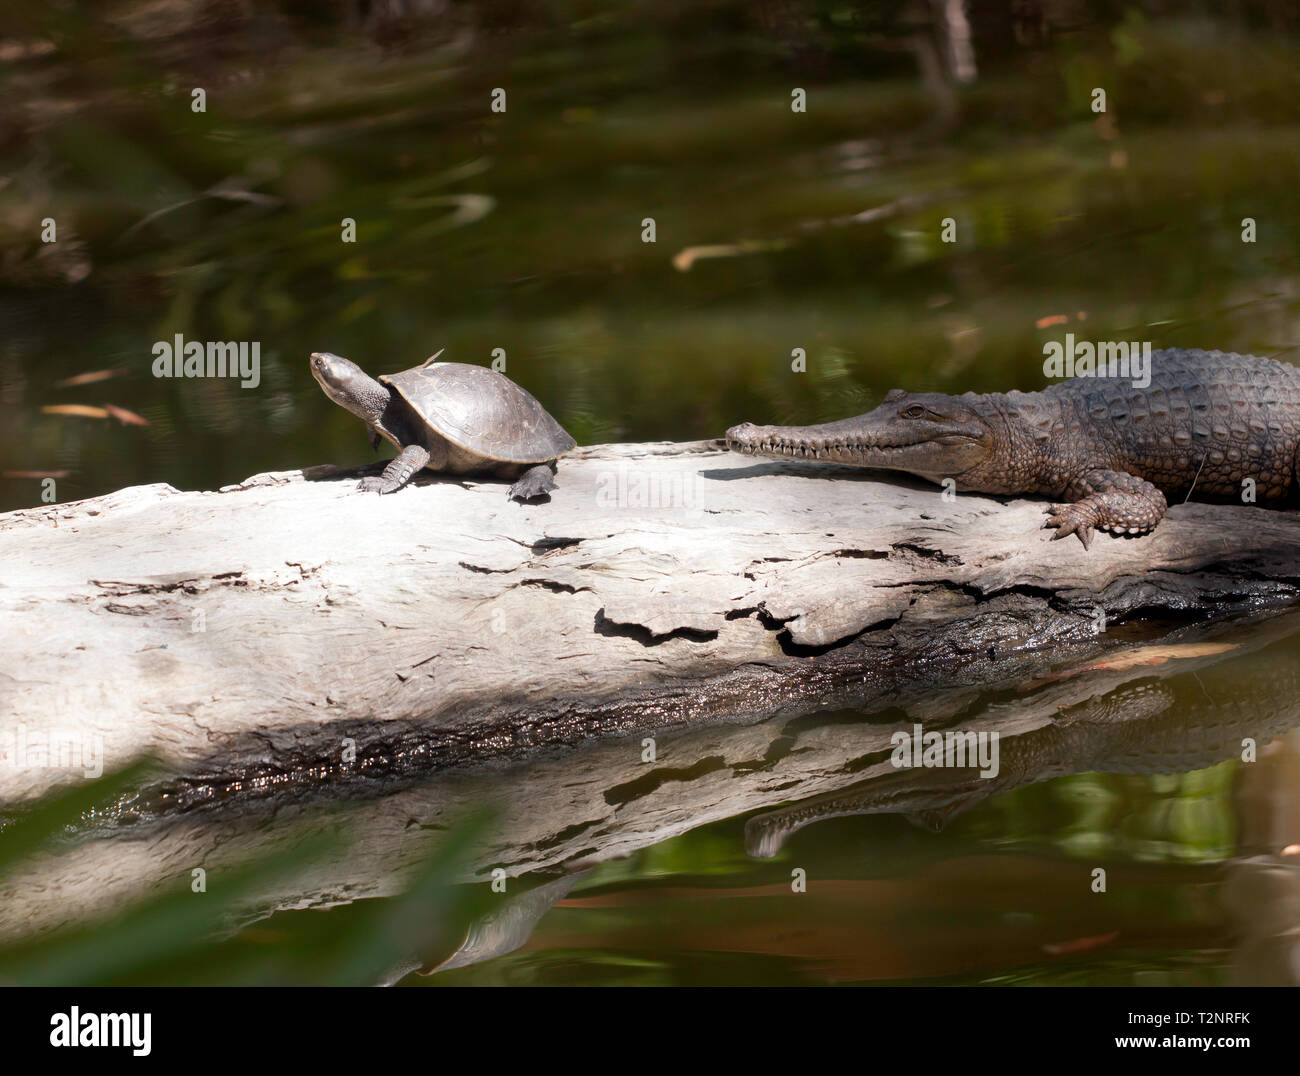 A Macquarie Turtle and a Freshwater Crocodile on a log in the lagoon at at Hartley's Crocodile Adventures, Captain Cook Highway, Wangetti, Queensland, Stock Photo